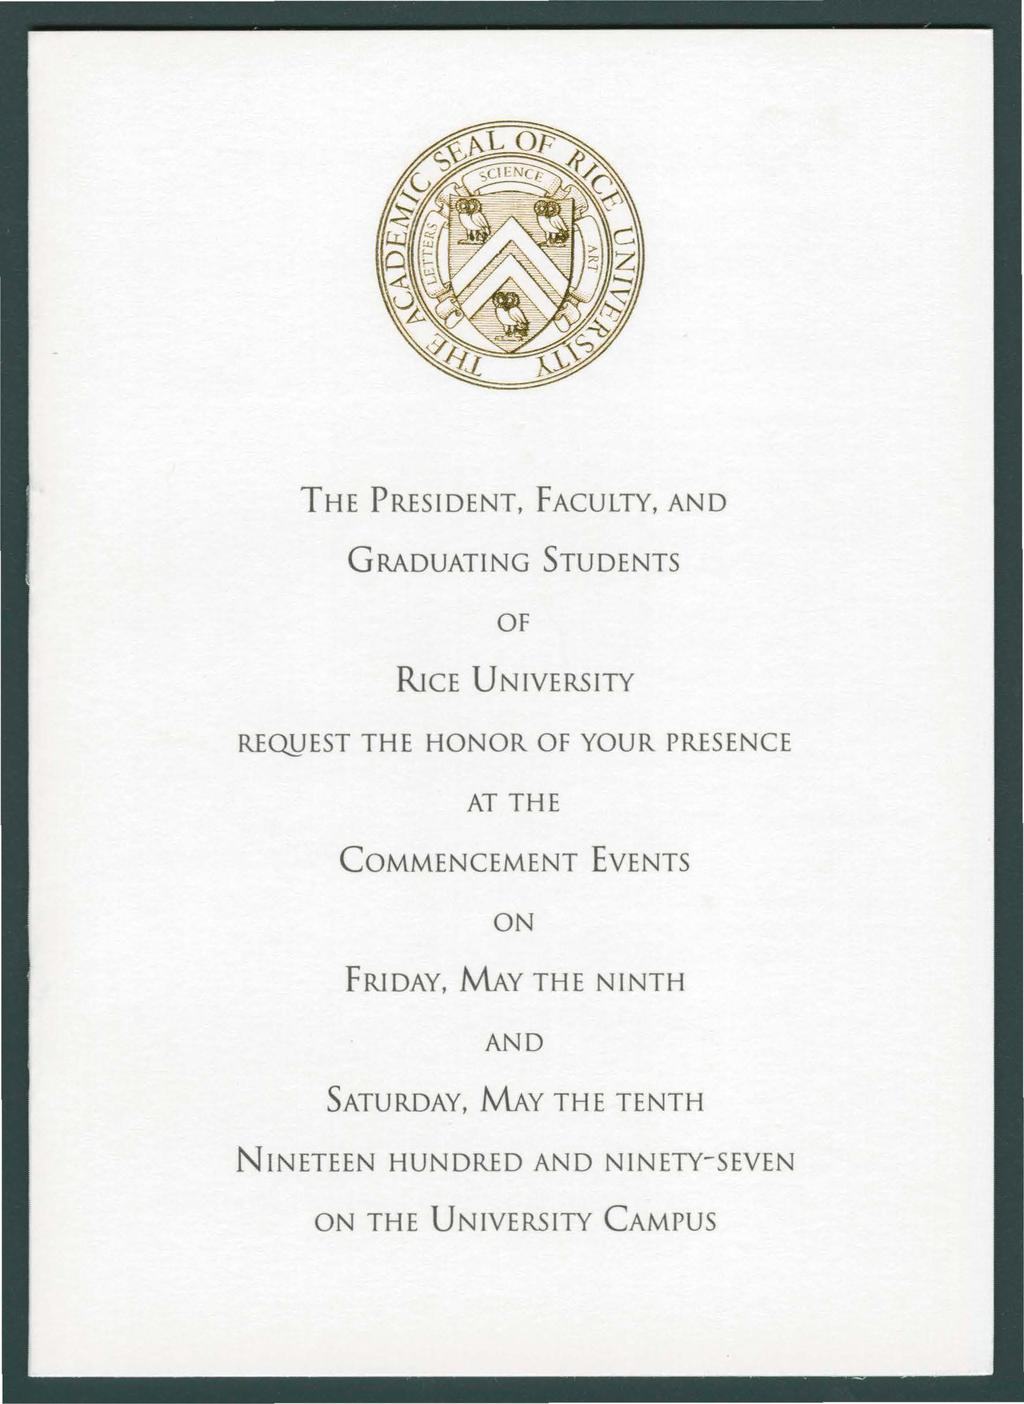 THE PRESIDENT, FACULTY, AND GRADUATING STUDENTS OF RICE UNIVERSITY REQ1JEST THE HONOR OF YOUR PRESENCE AT THE